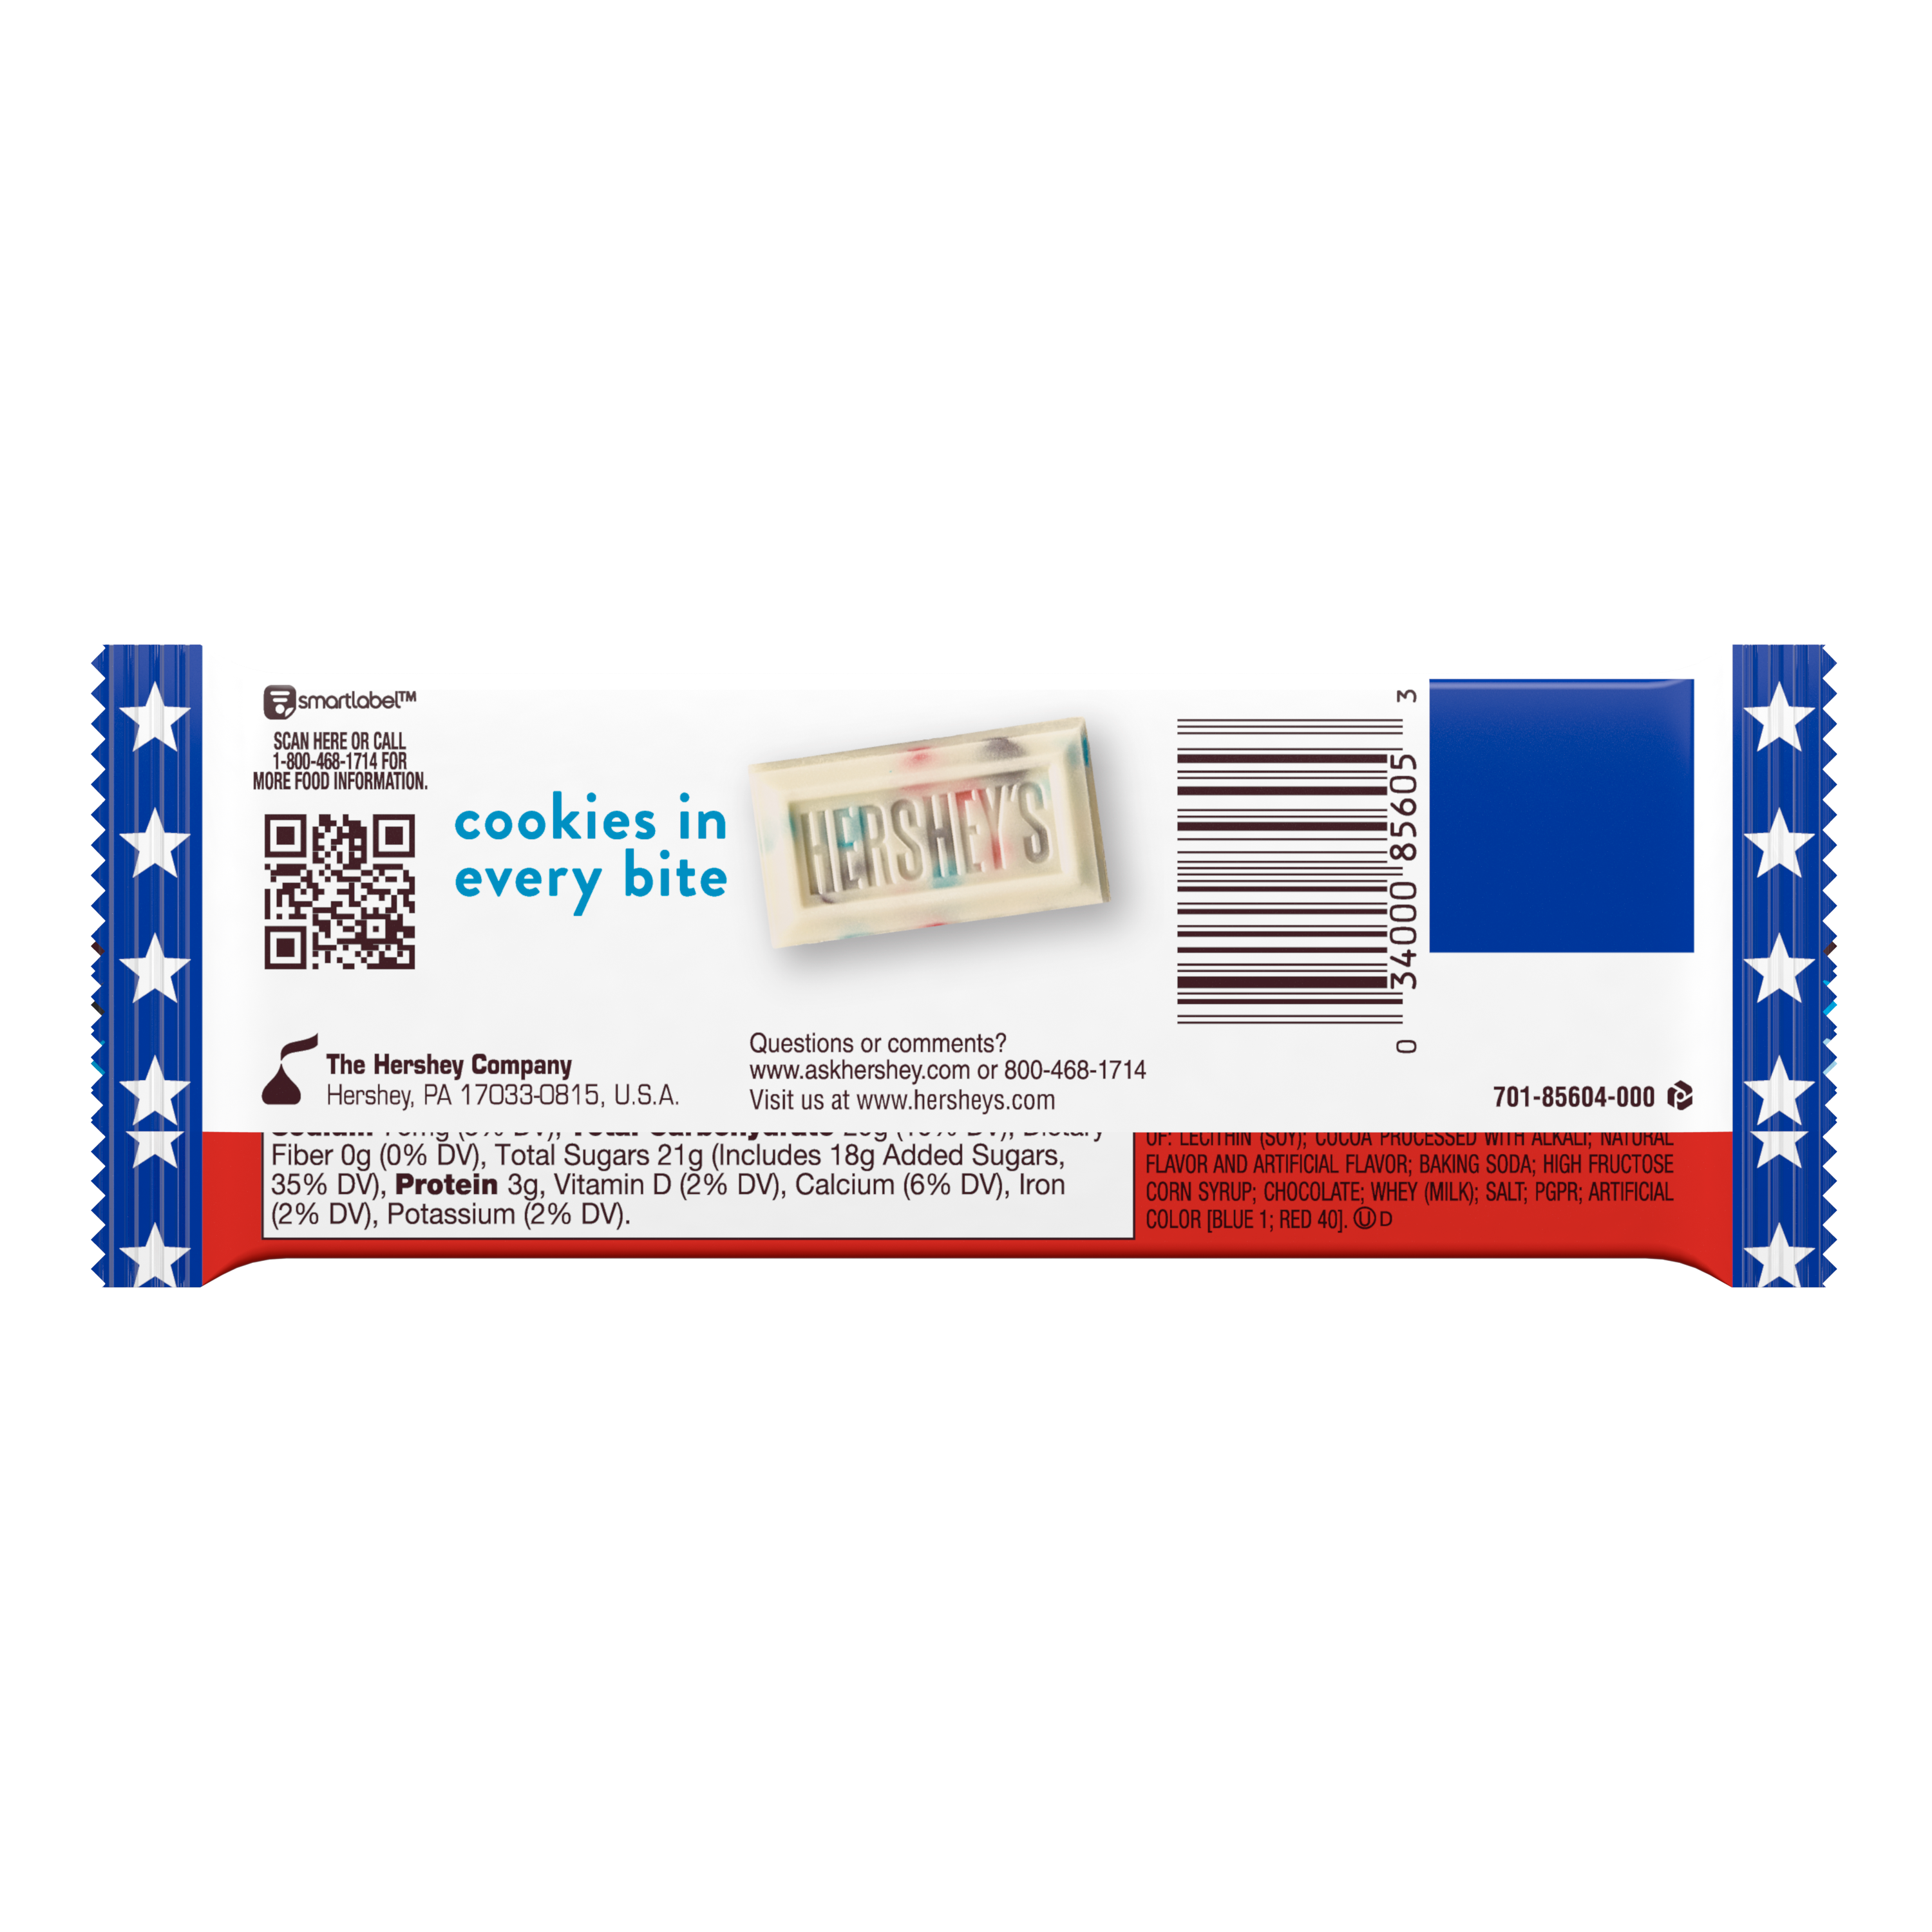 HERSHEY’S COOKIES ‘N’ CREME Red, White & Blue Candy Bar, 1.55 oz - Back of Package